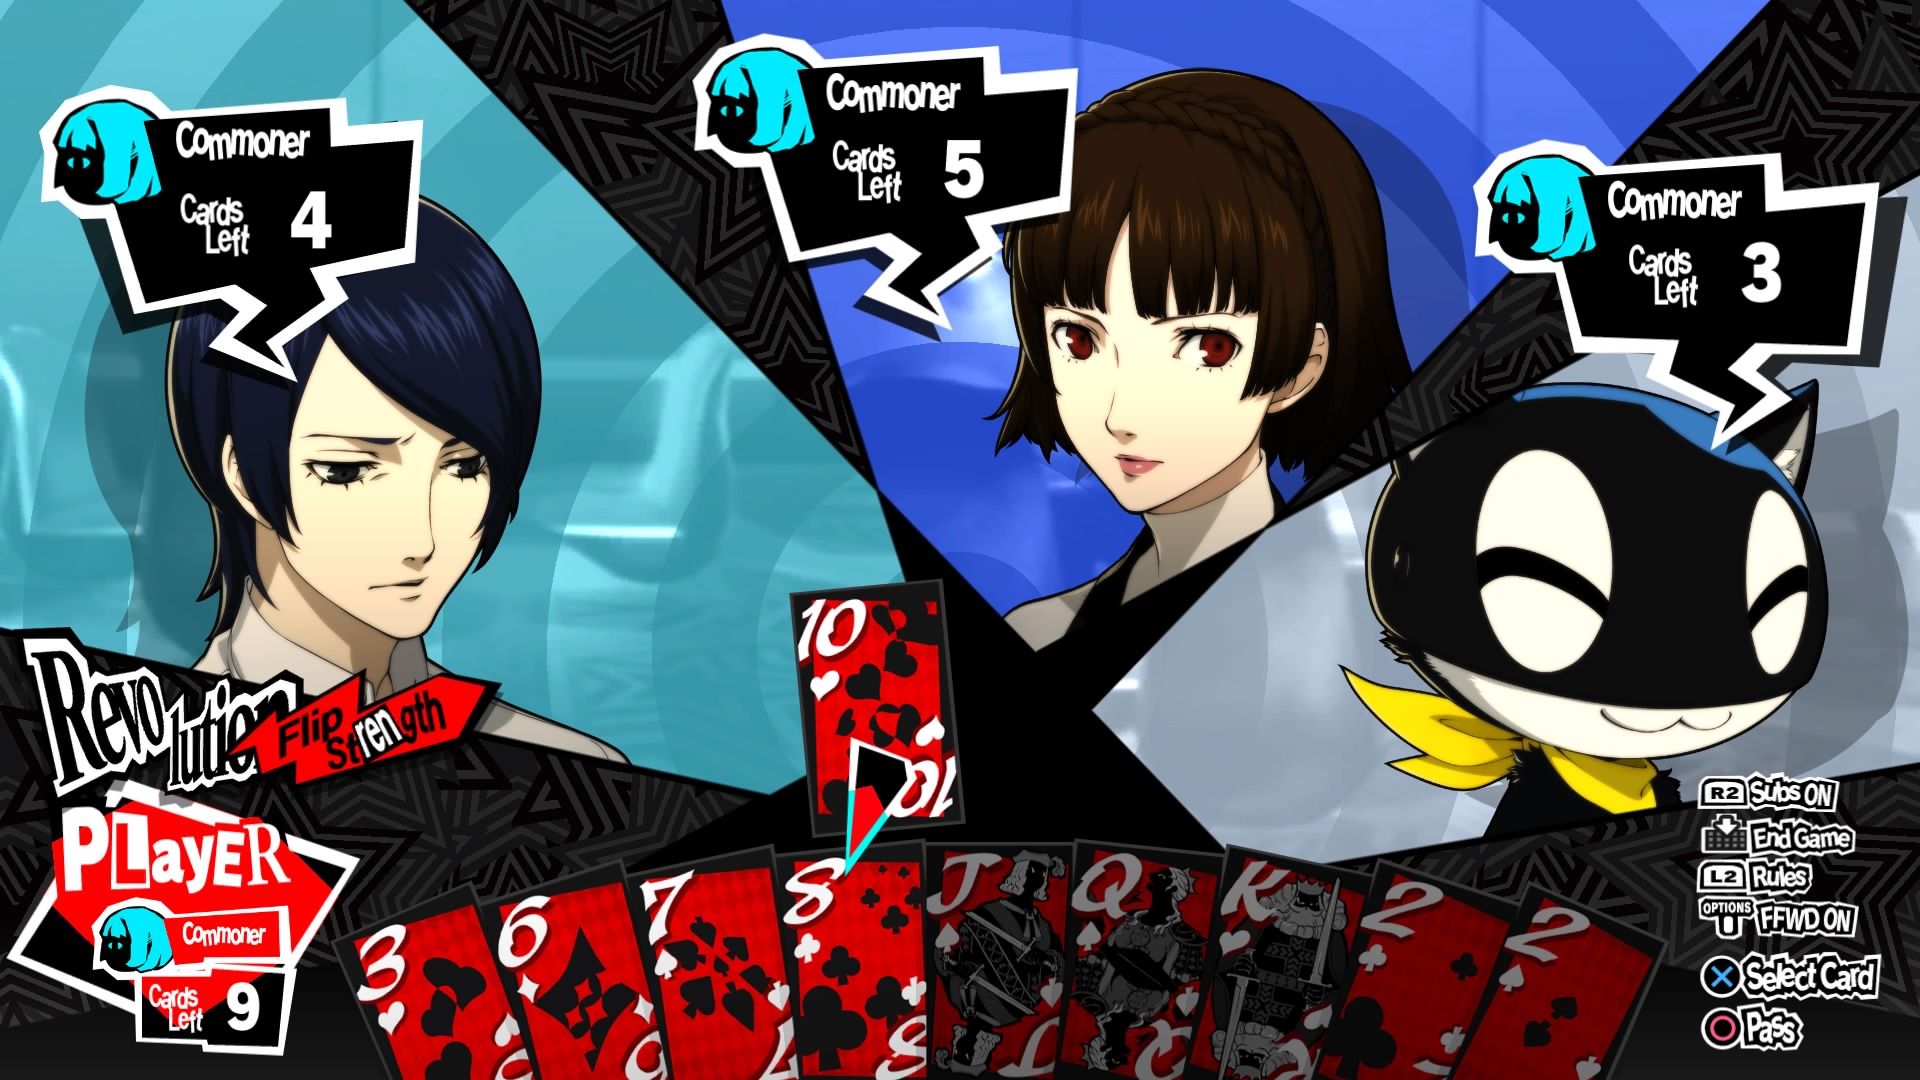 Persona 5 Royal: Thieves Den Guide